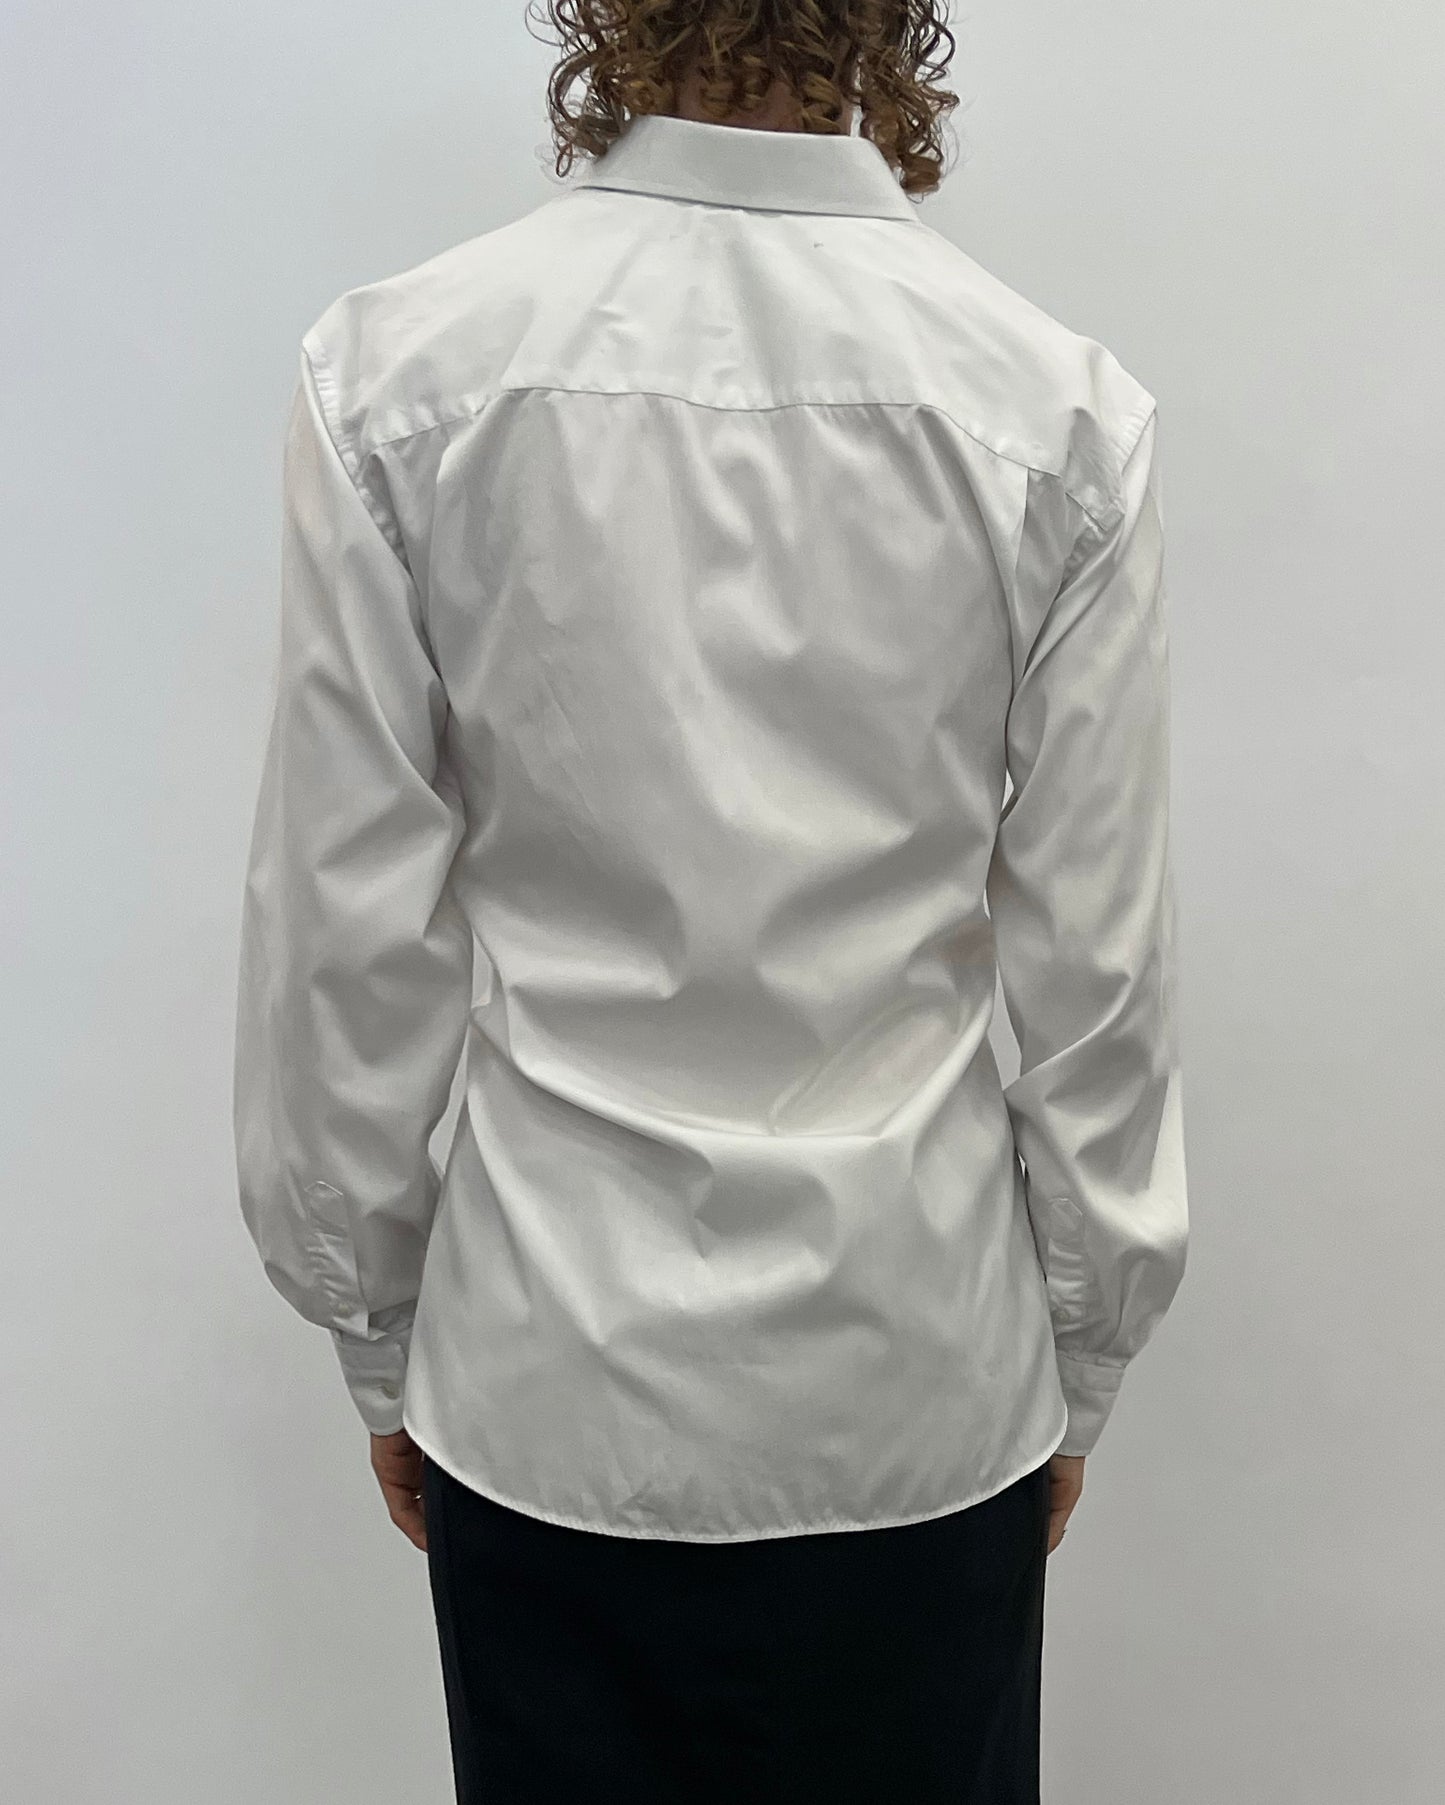 Long sleeve shirt with audelà logo on a string in waist.